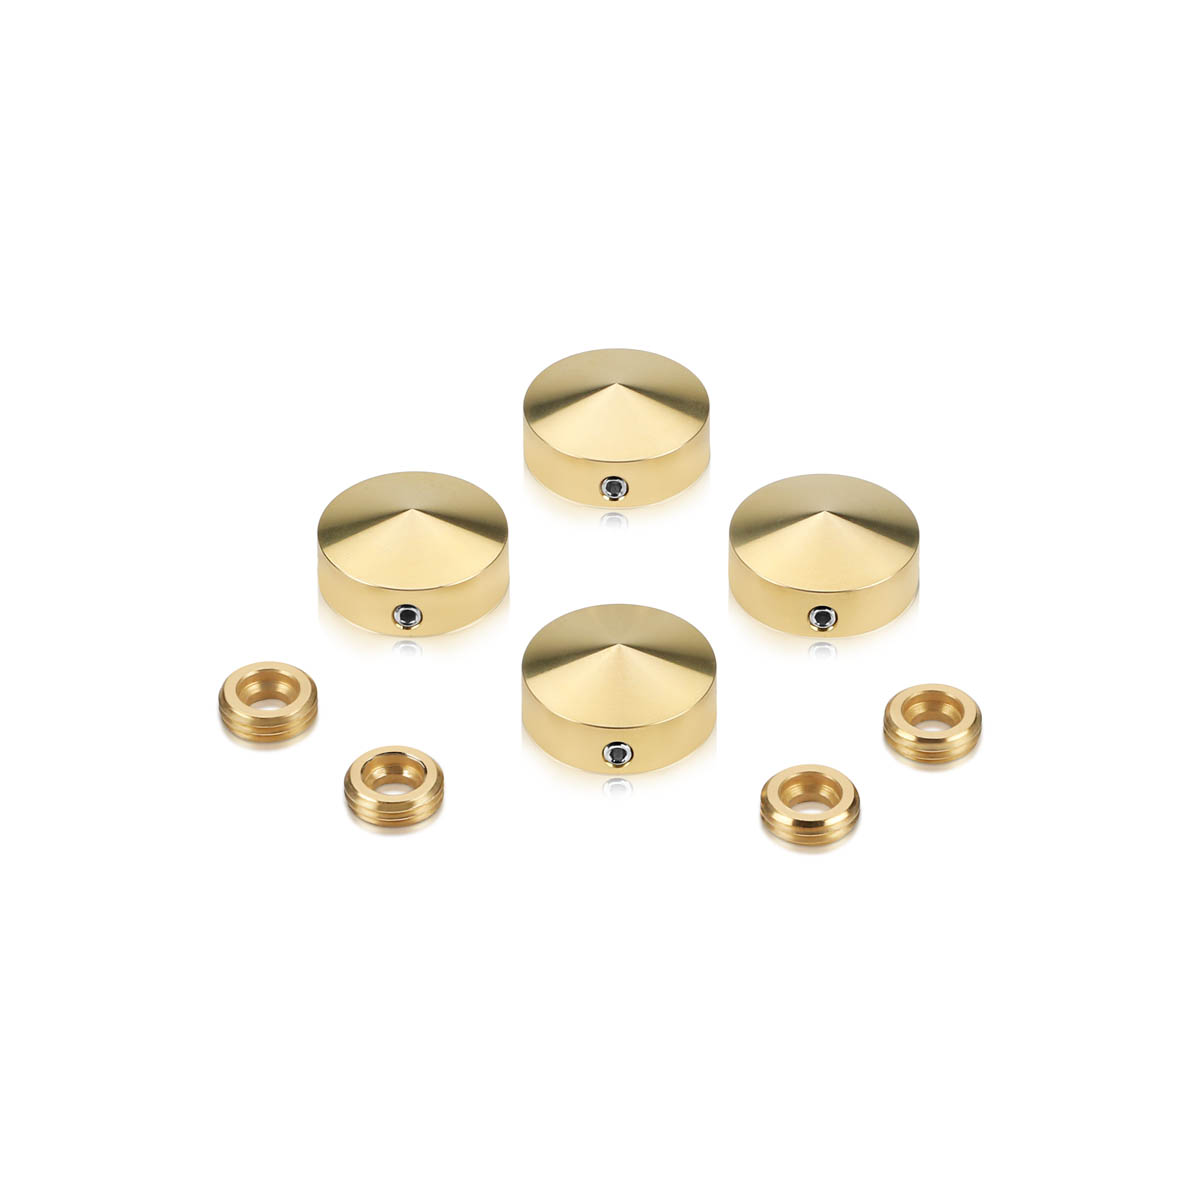 Set of 4 Conical Locking Screw Cover, Diameter: 13/16'' (3/4'') Brass Plain Finish (Indoor or Outdoor Use, but for outdoor use Brass will come darker if no varnish applied)